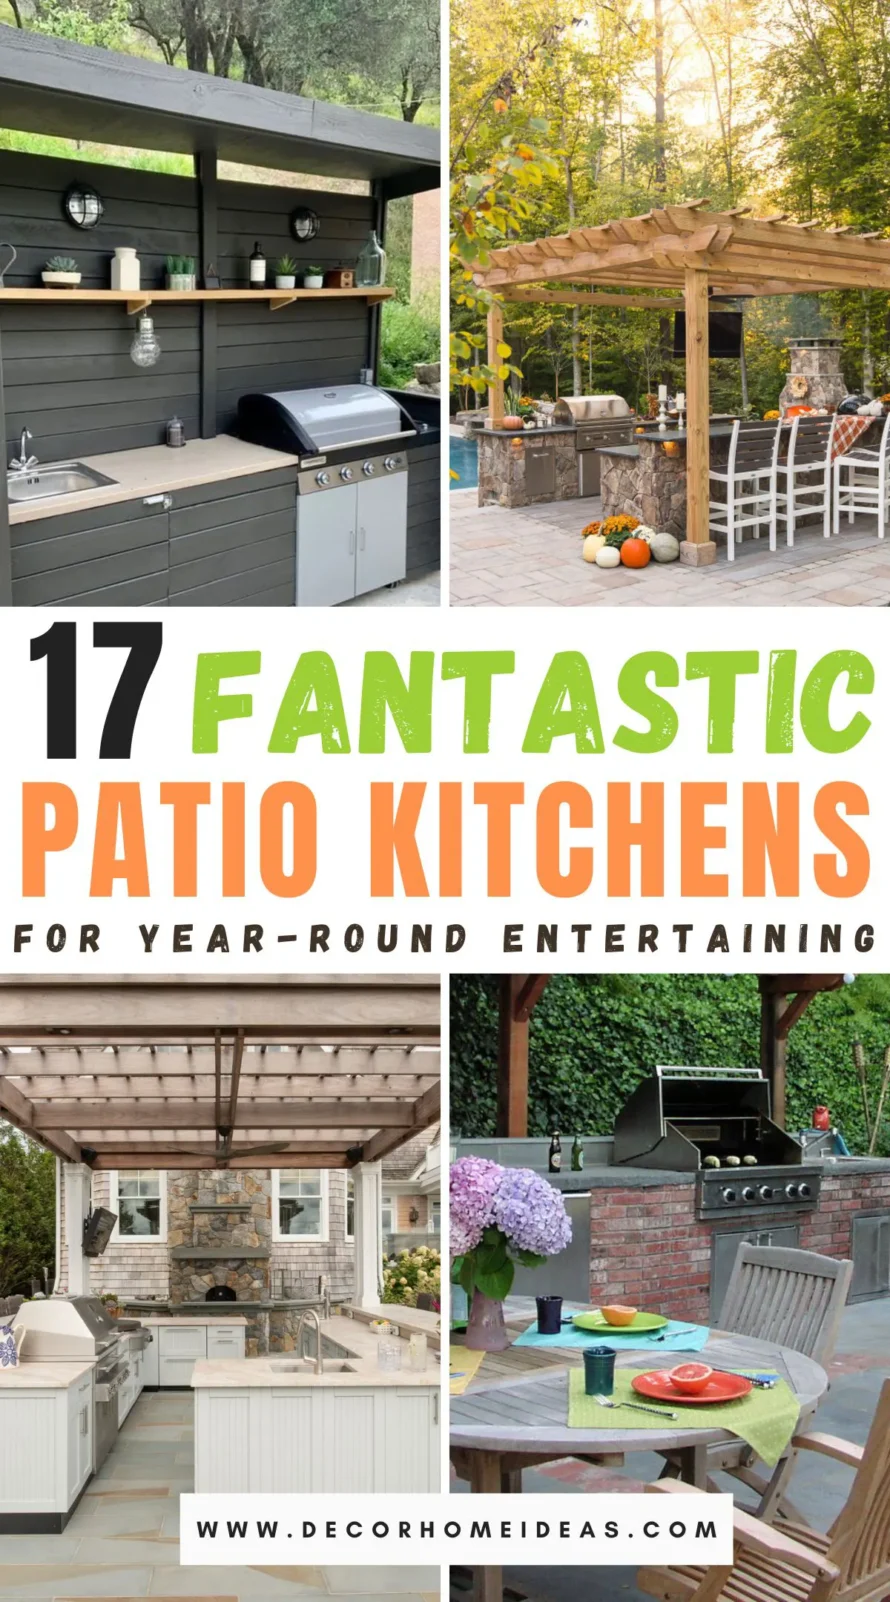 Discover 17 fantastic outdoor patio kitchen ideas that blend style and functionality. From cozy nooks to expansive setups, explore innovative designs that make al fresco cooking delightful. Click to get inspired and transform your outdoor space!